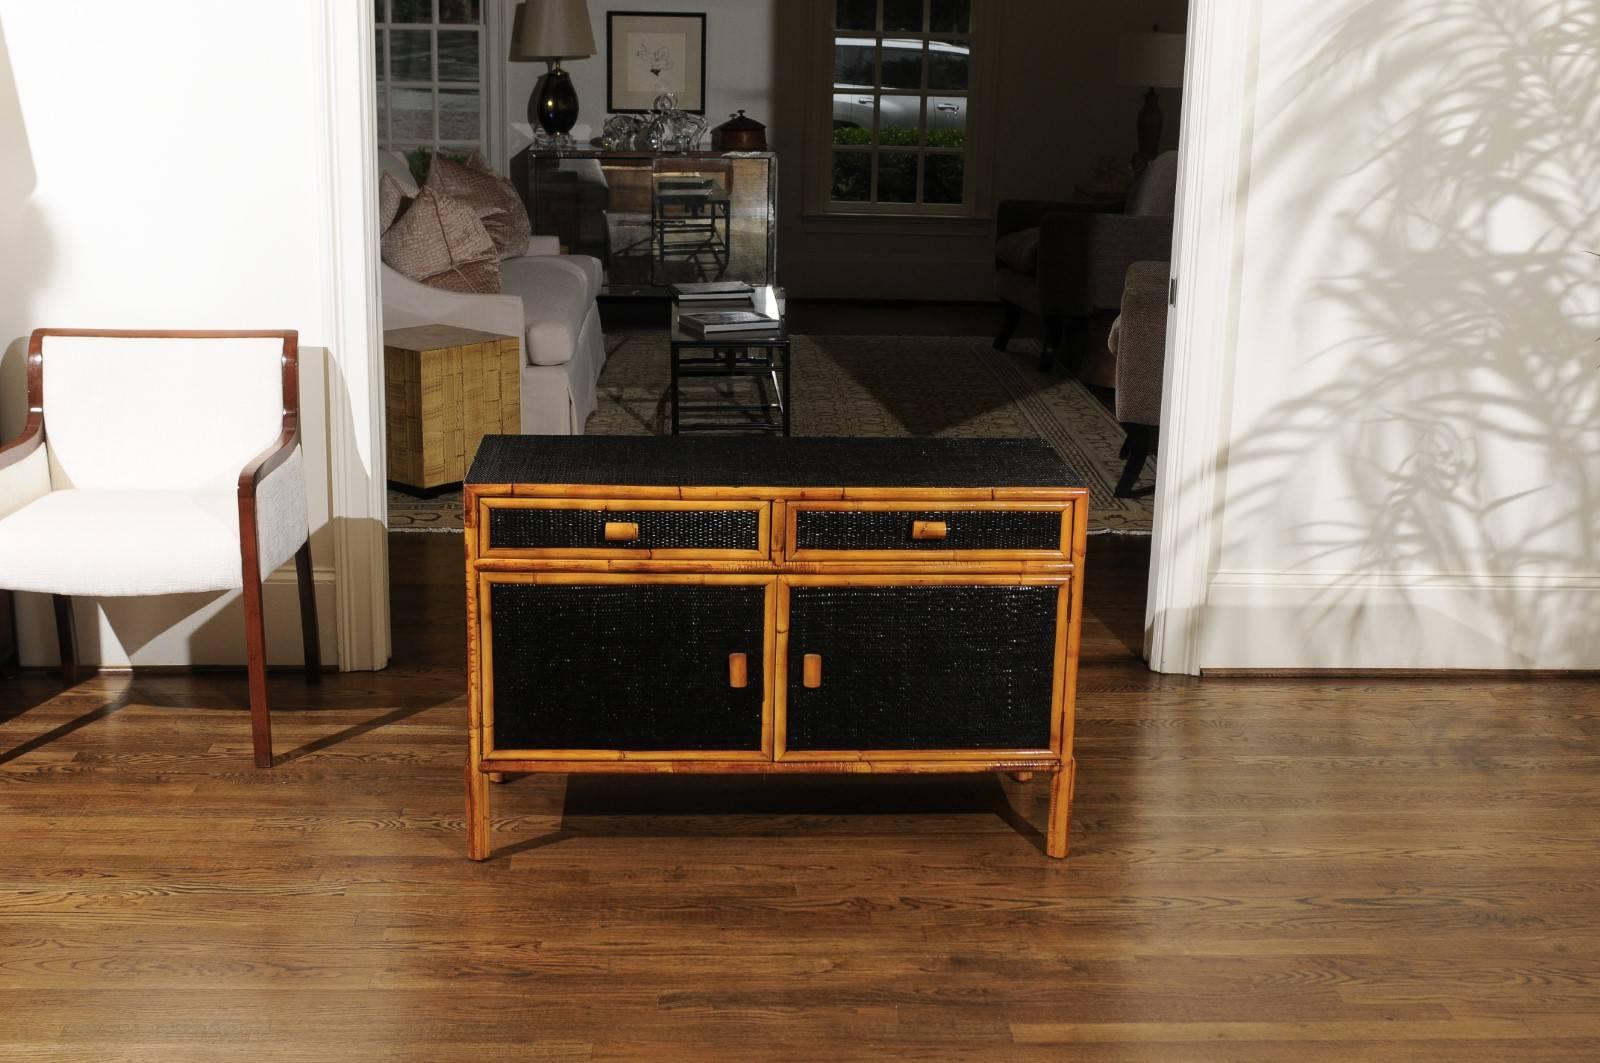 This magnificent chest is shipped as professionally photographed and described in the listing narrative: Completely Installation Ready.

A exceptional multipurpose cabinet, circa 1970. Two drawers with open compartment below. Exceptionally crafted